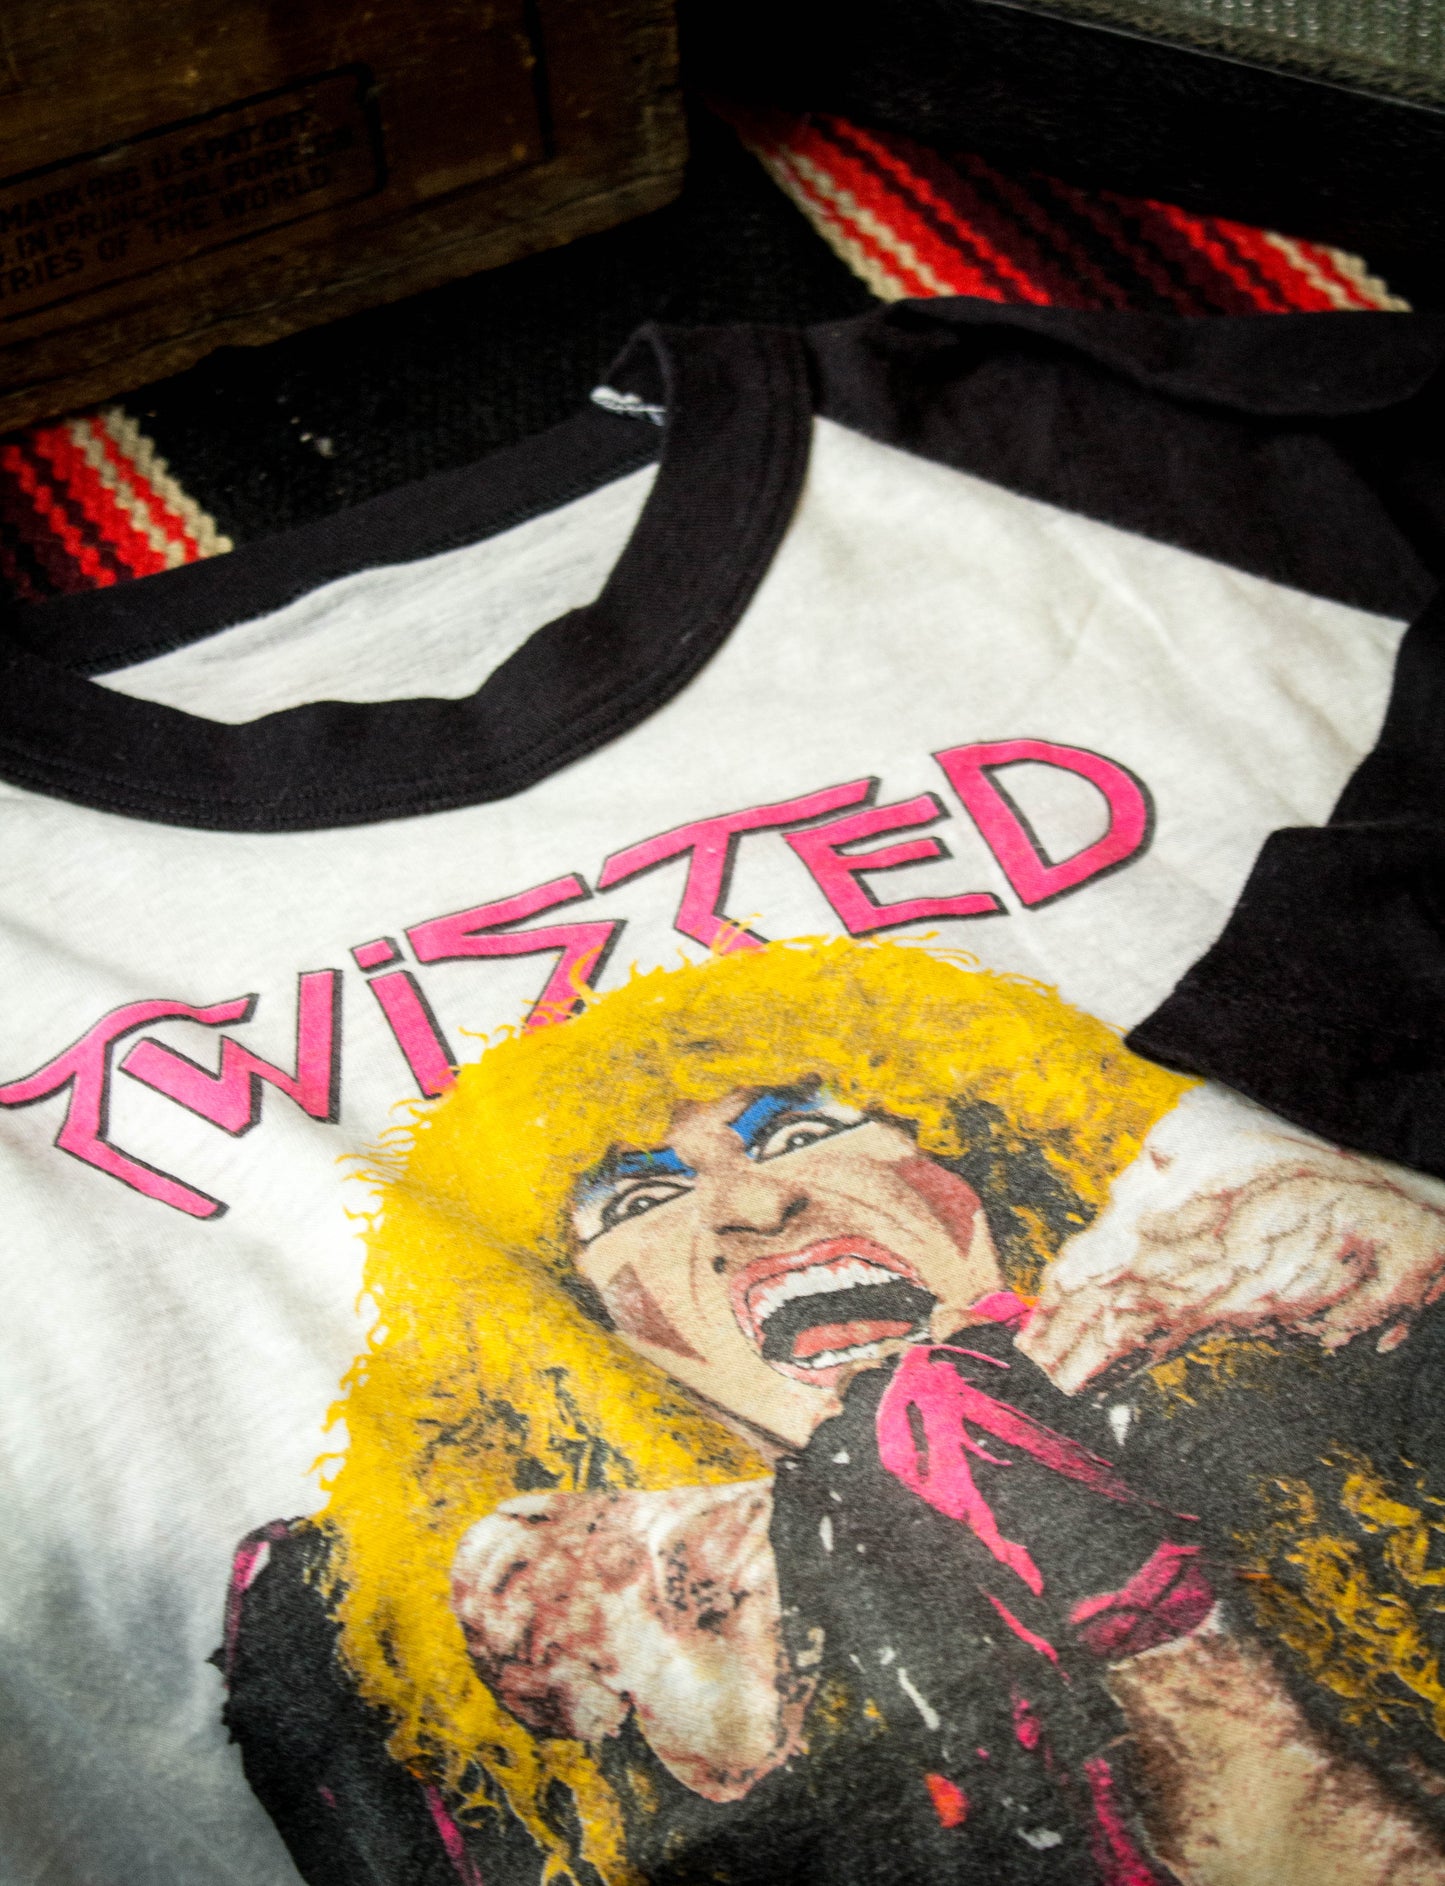 Vintage 1984 Twisted Sister Stay Hungry Tour Jersey Concert T Shirt Large